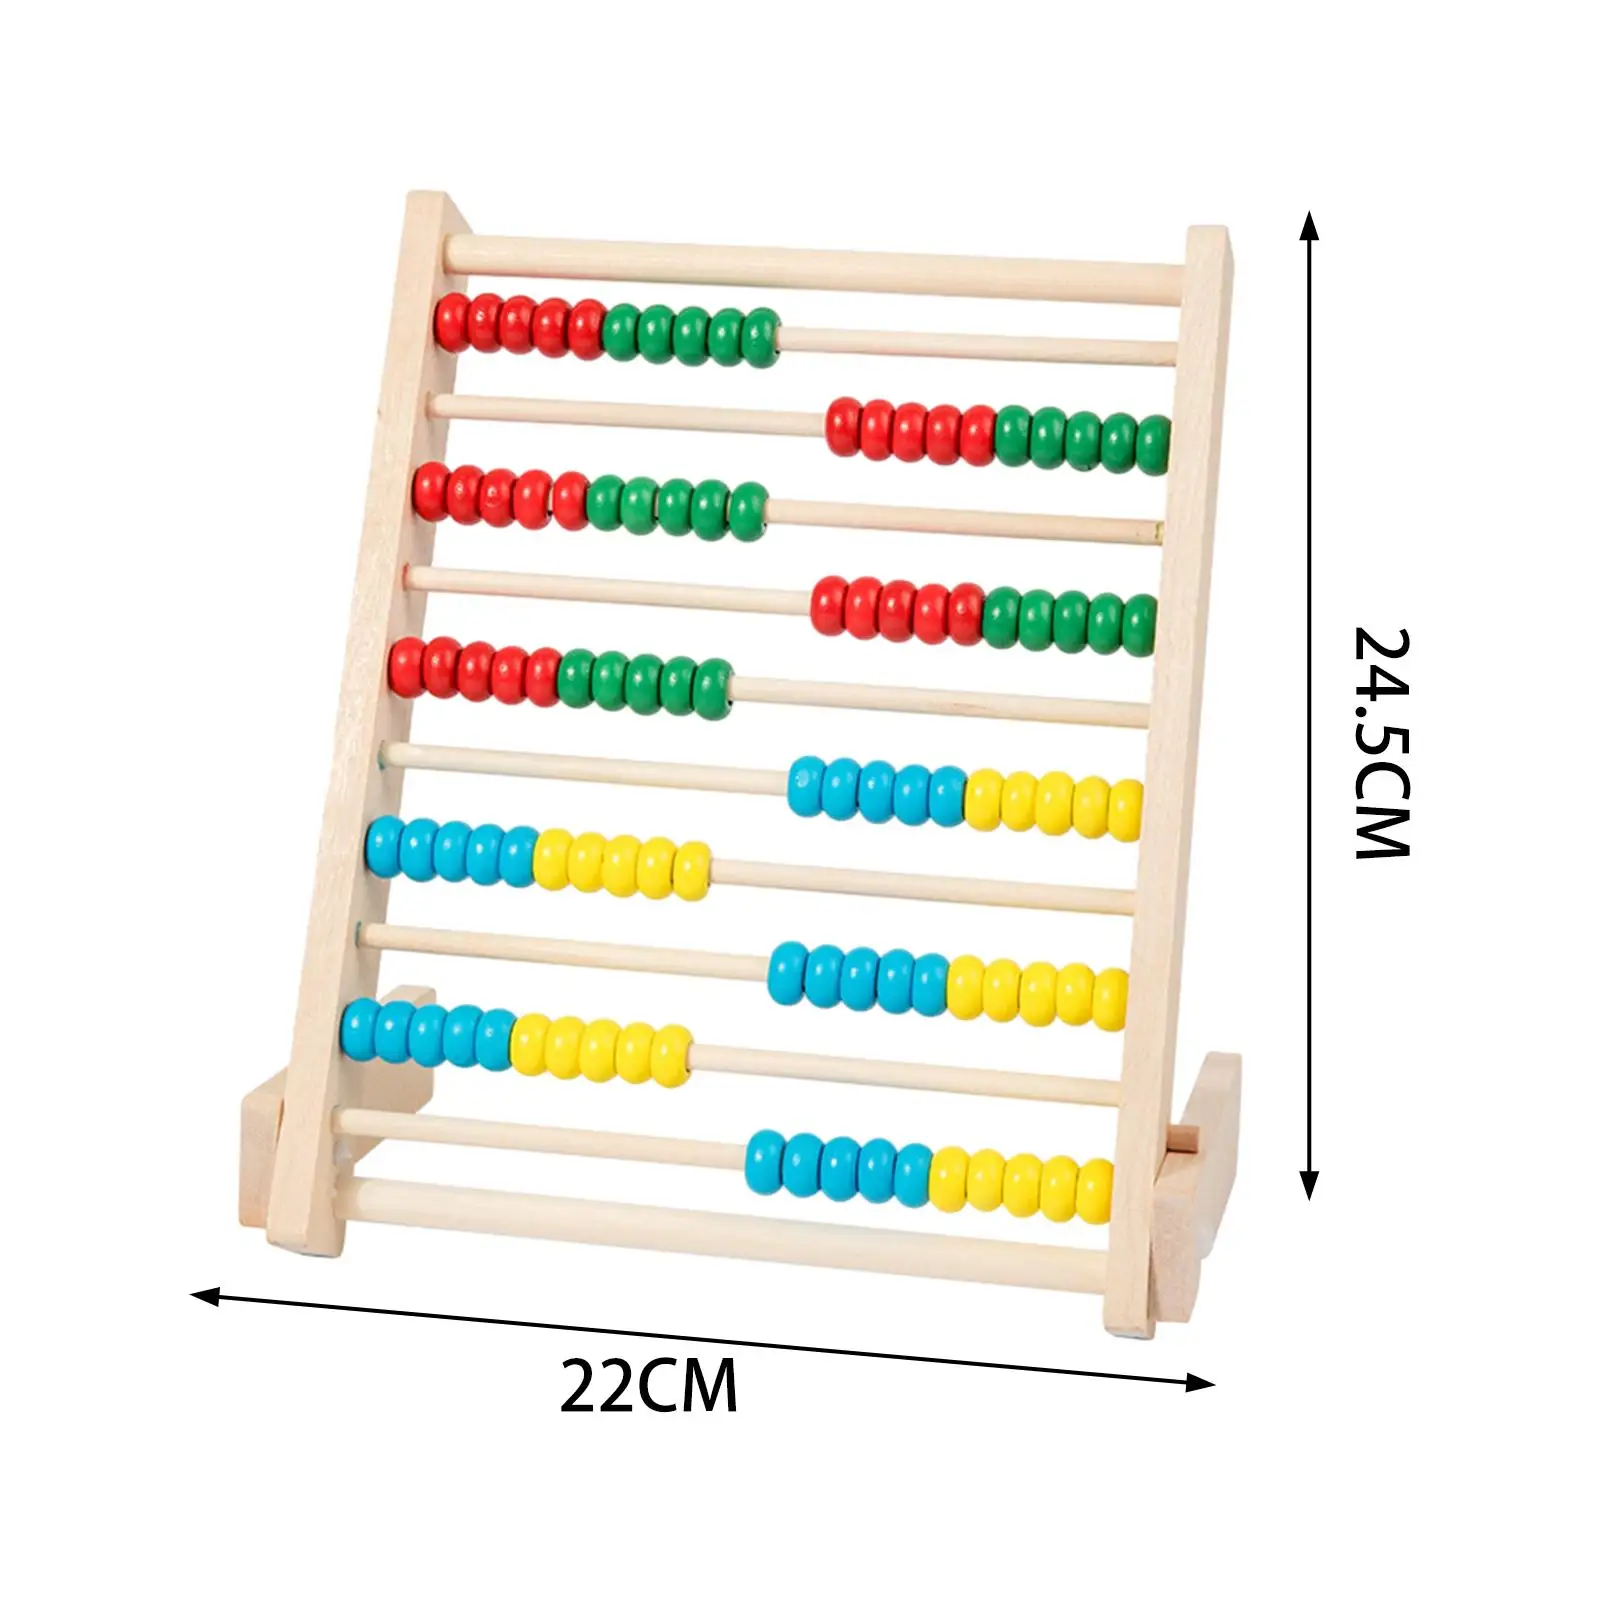 10 Row Wooden Counting Frame Abacus Educational Counting Toy Preschool Math Learning Toy for Elementary Kids Kindergarten